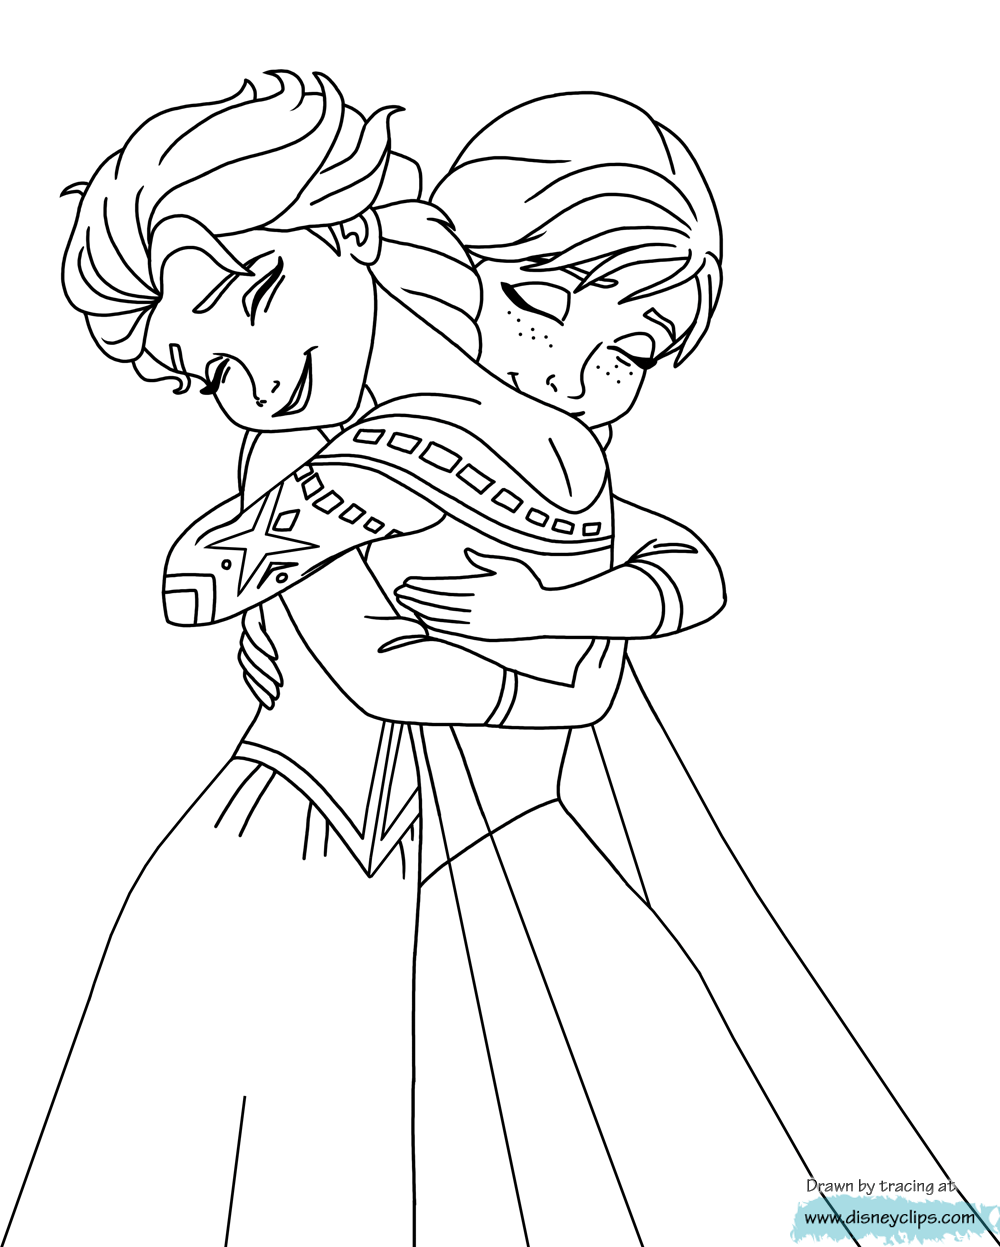 Frozen coloring page with few details for kids : Anna & Elsa